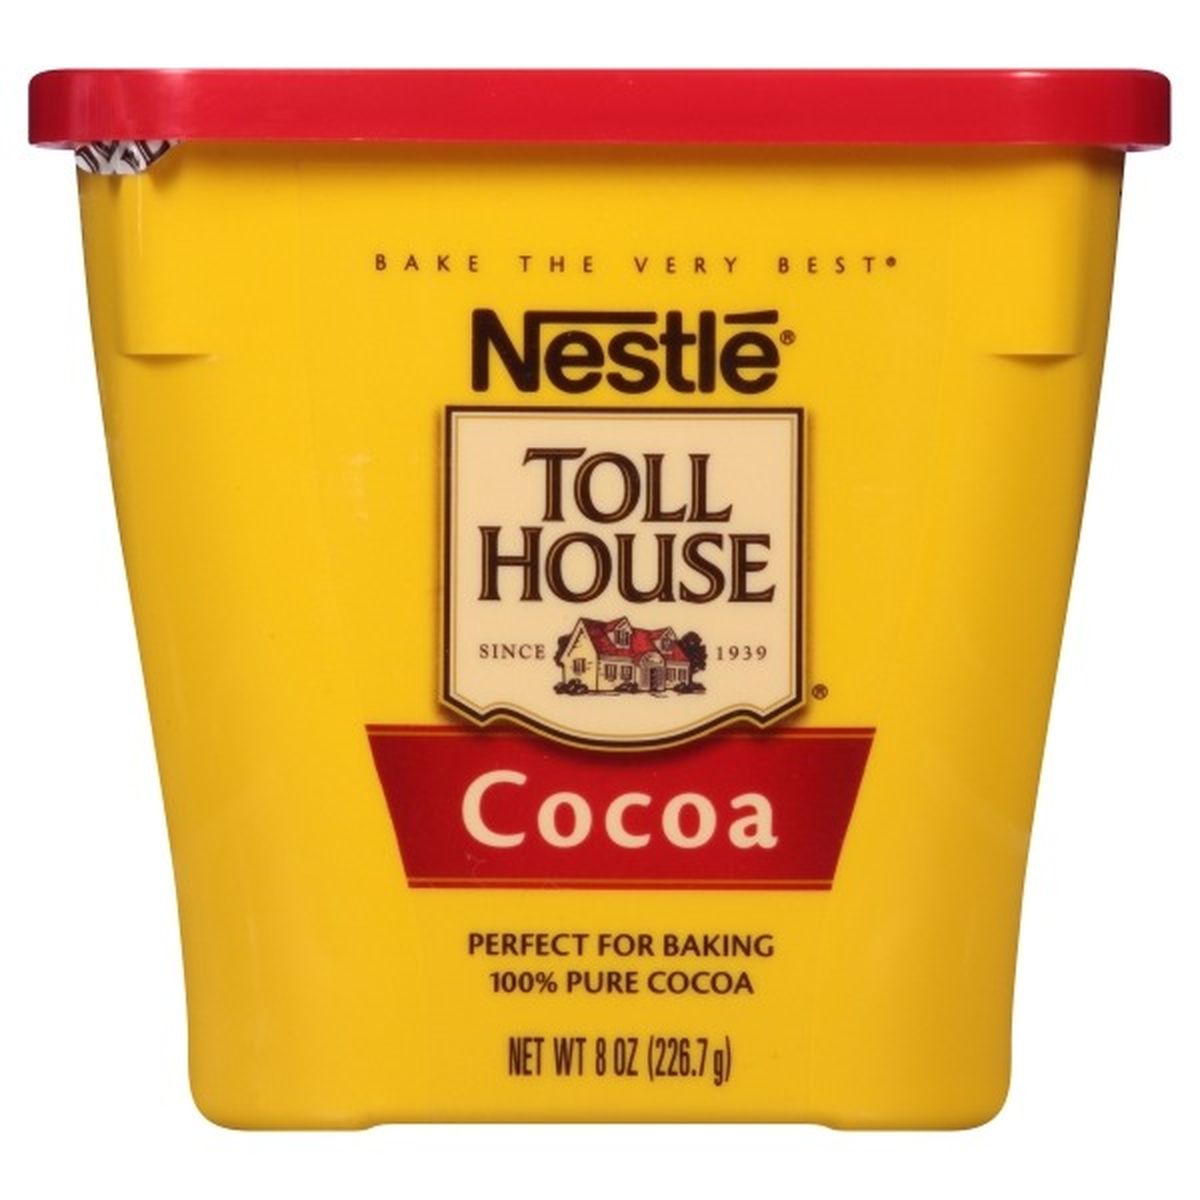 Calories in Toll House Toll House Cocoa, 100% Pure